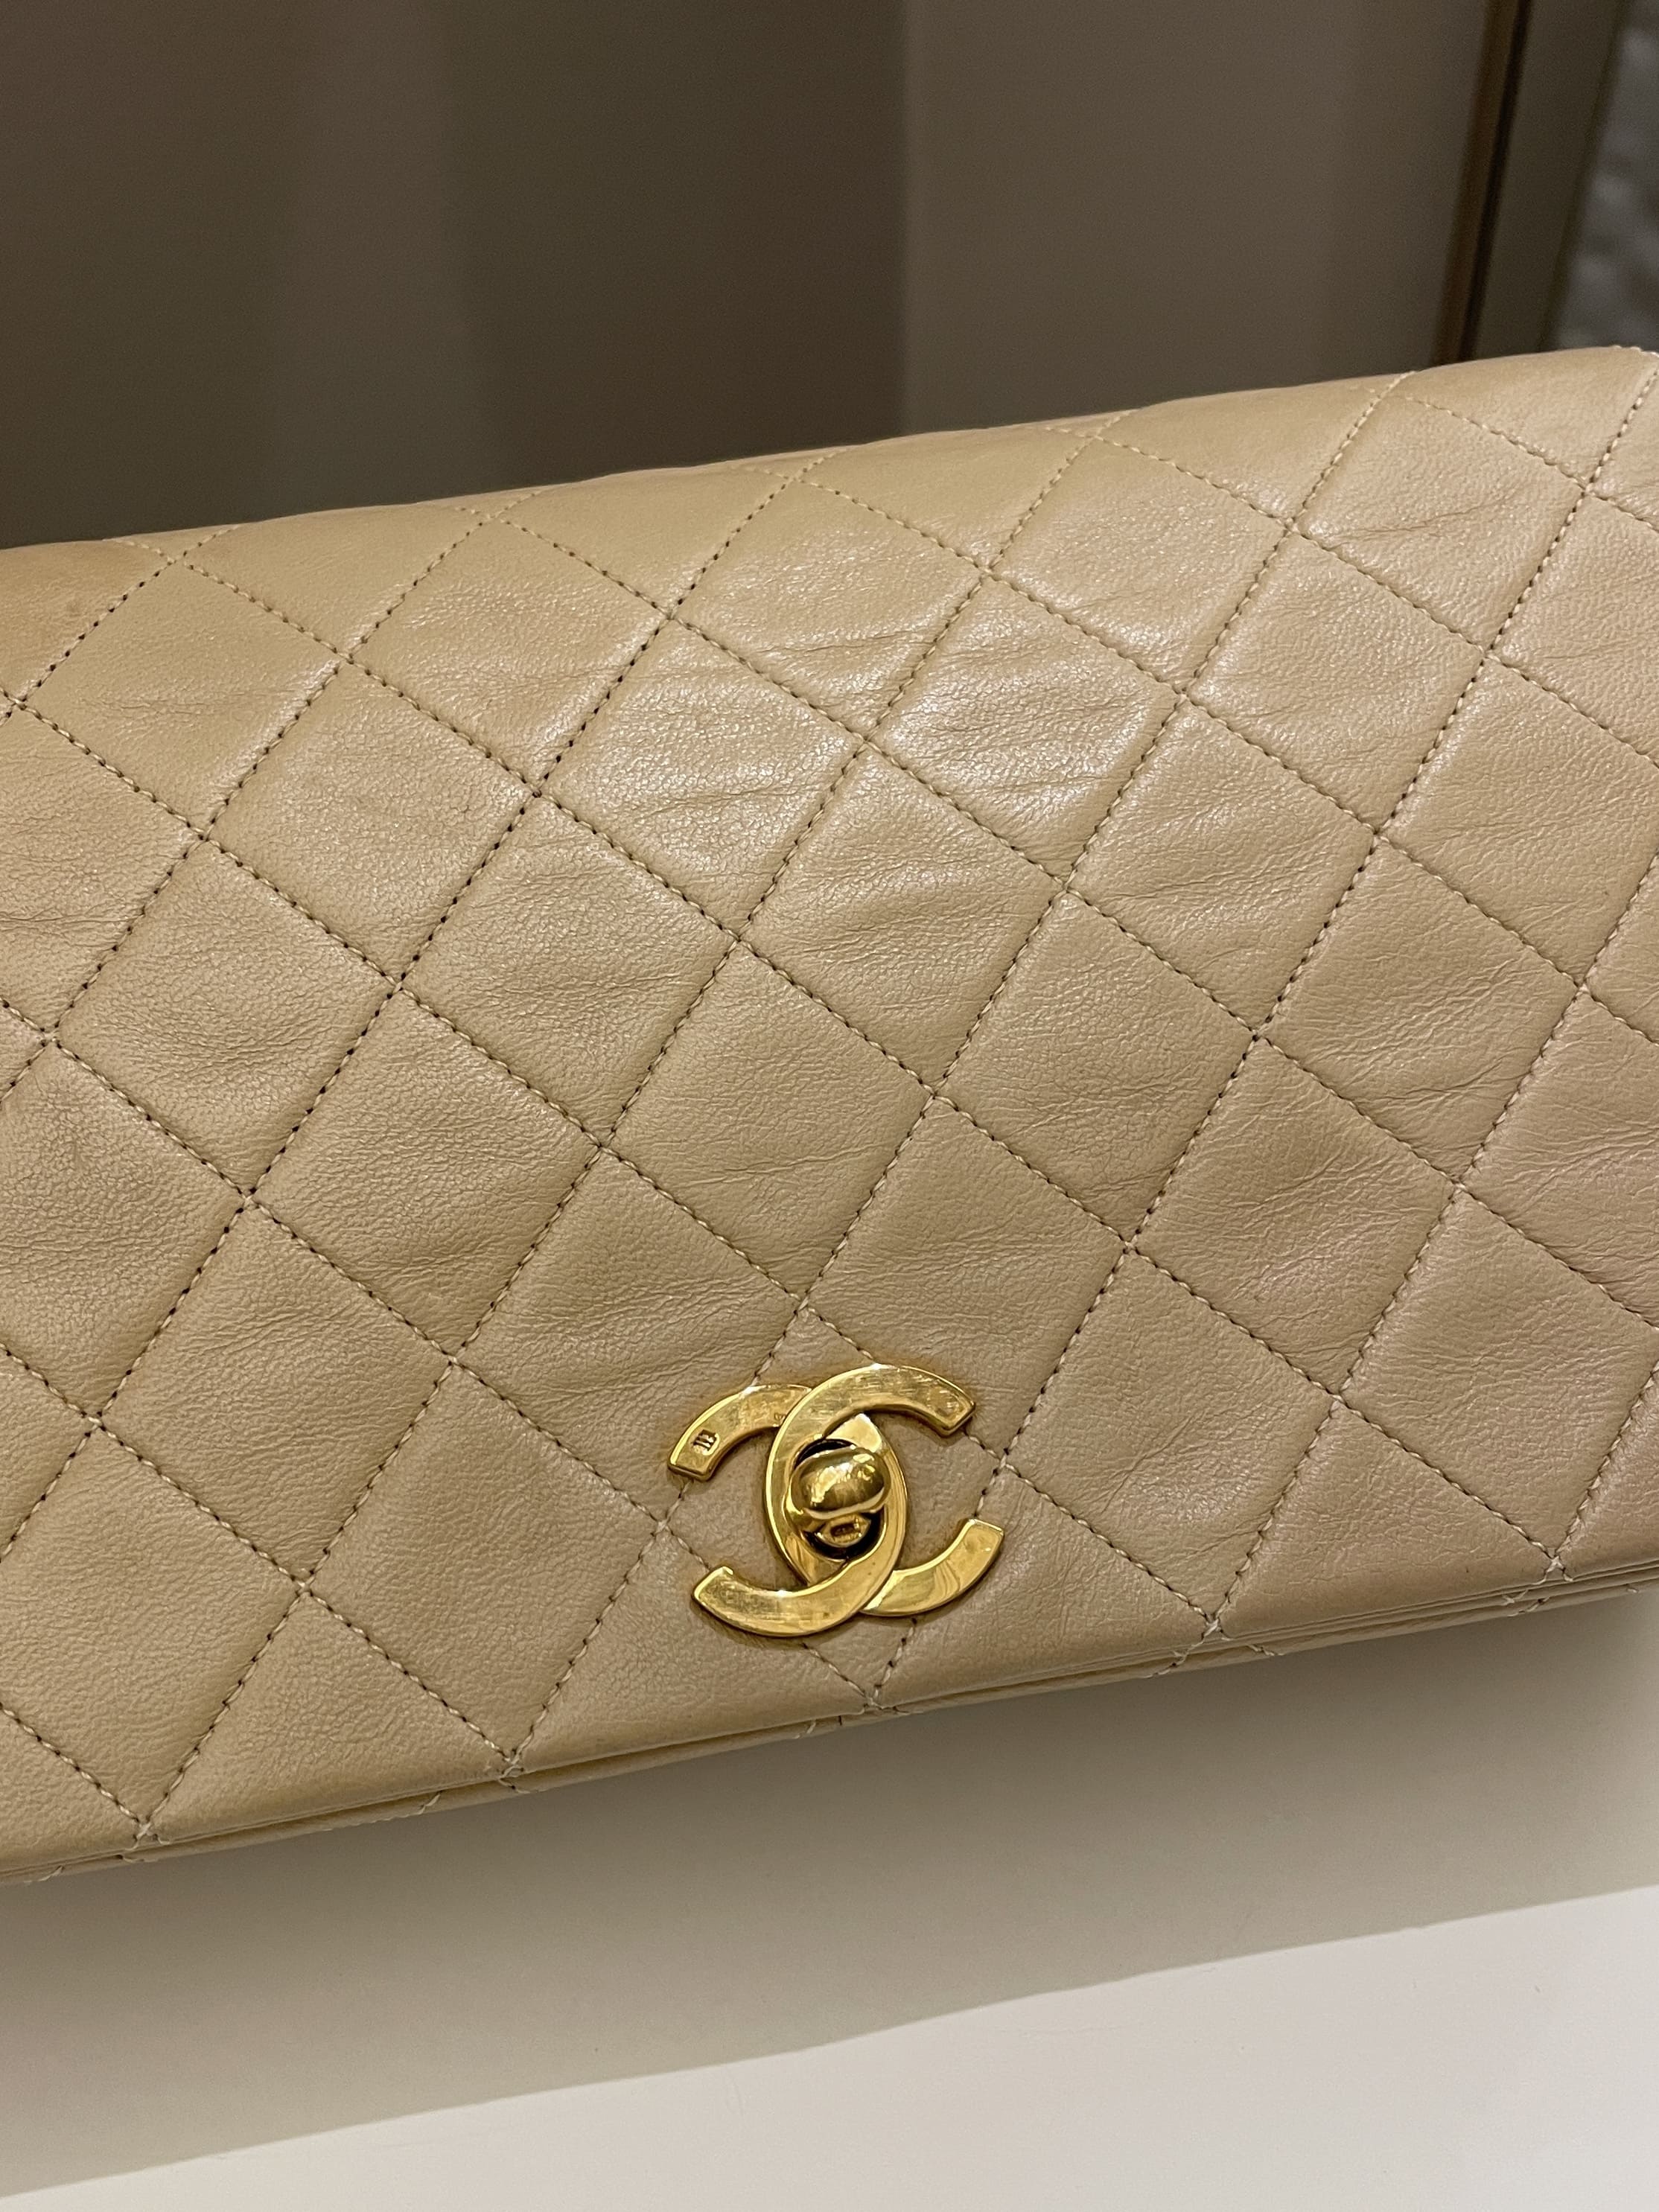 Chanel Vintage Quilted Full Flap Bag Beige Lambskin